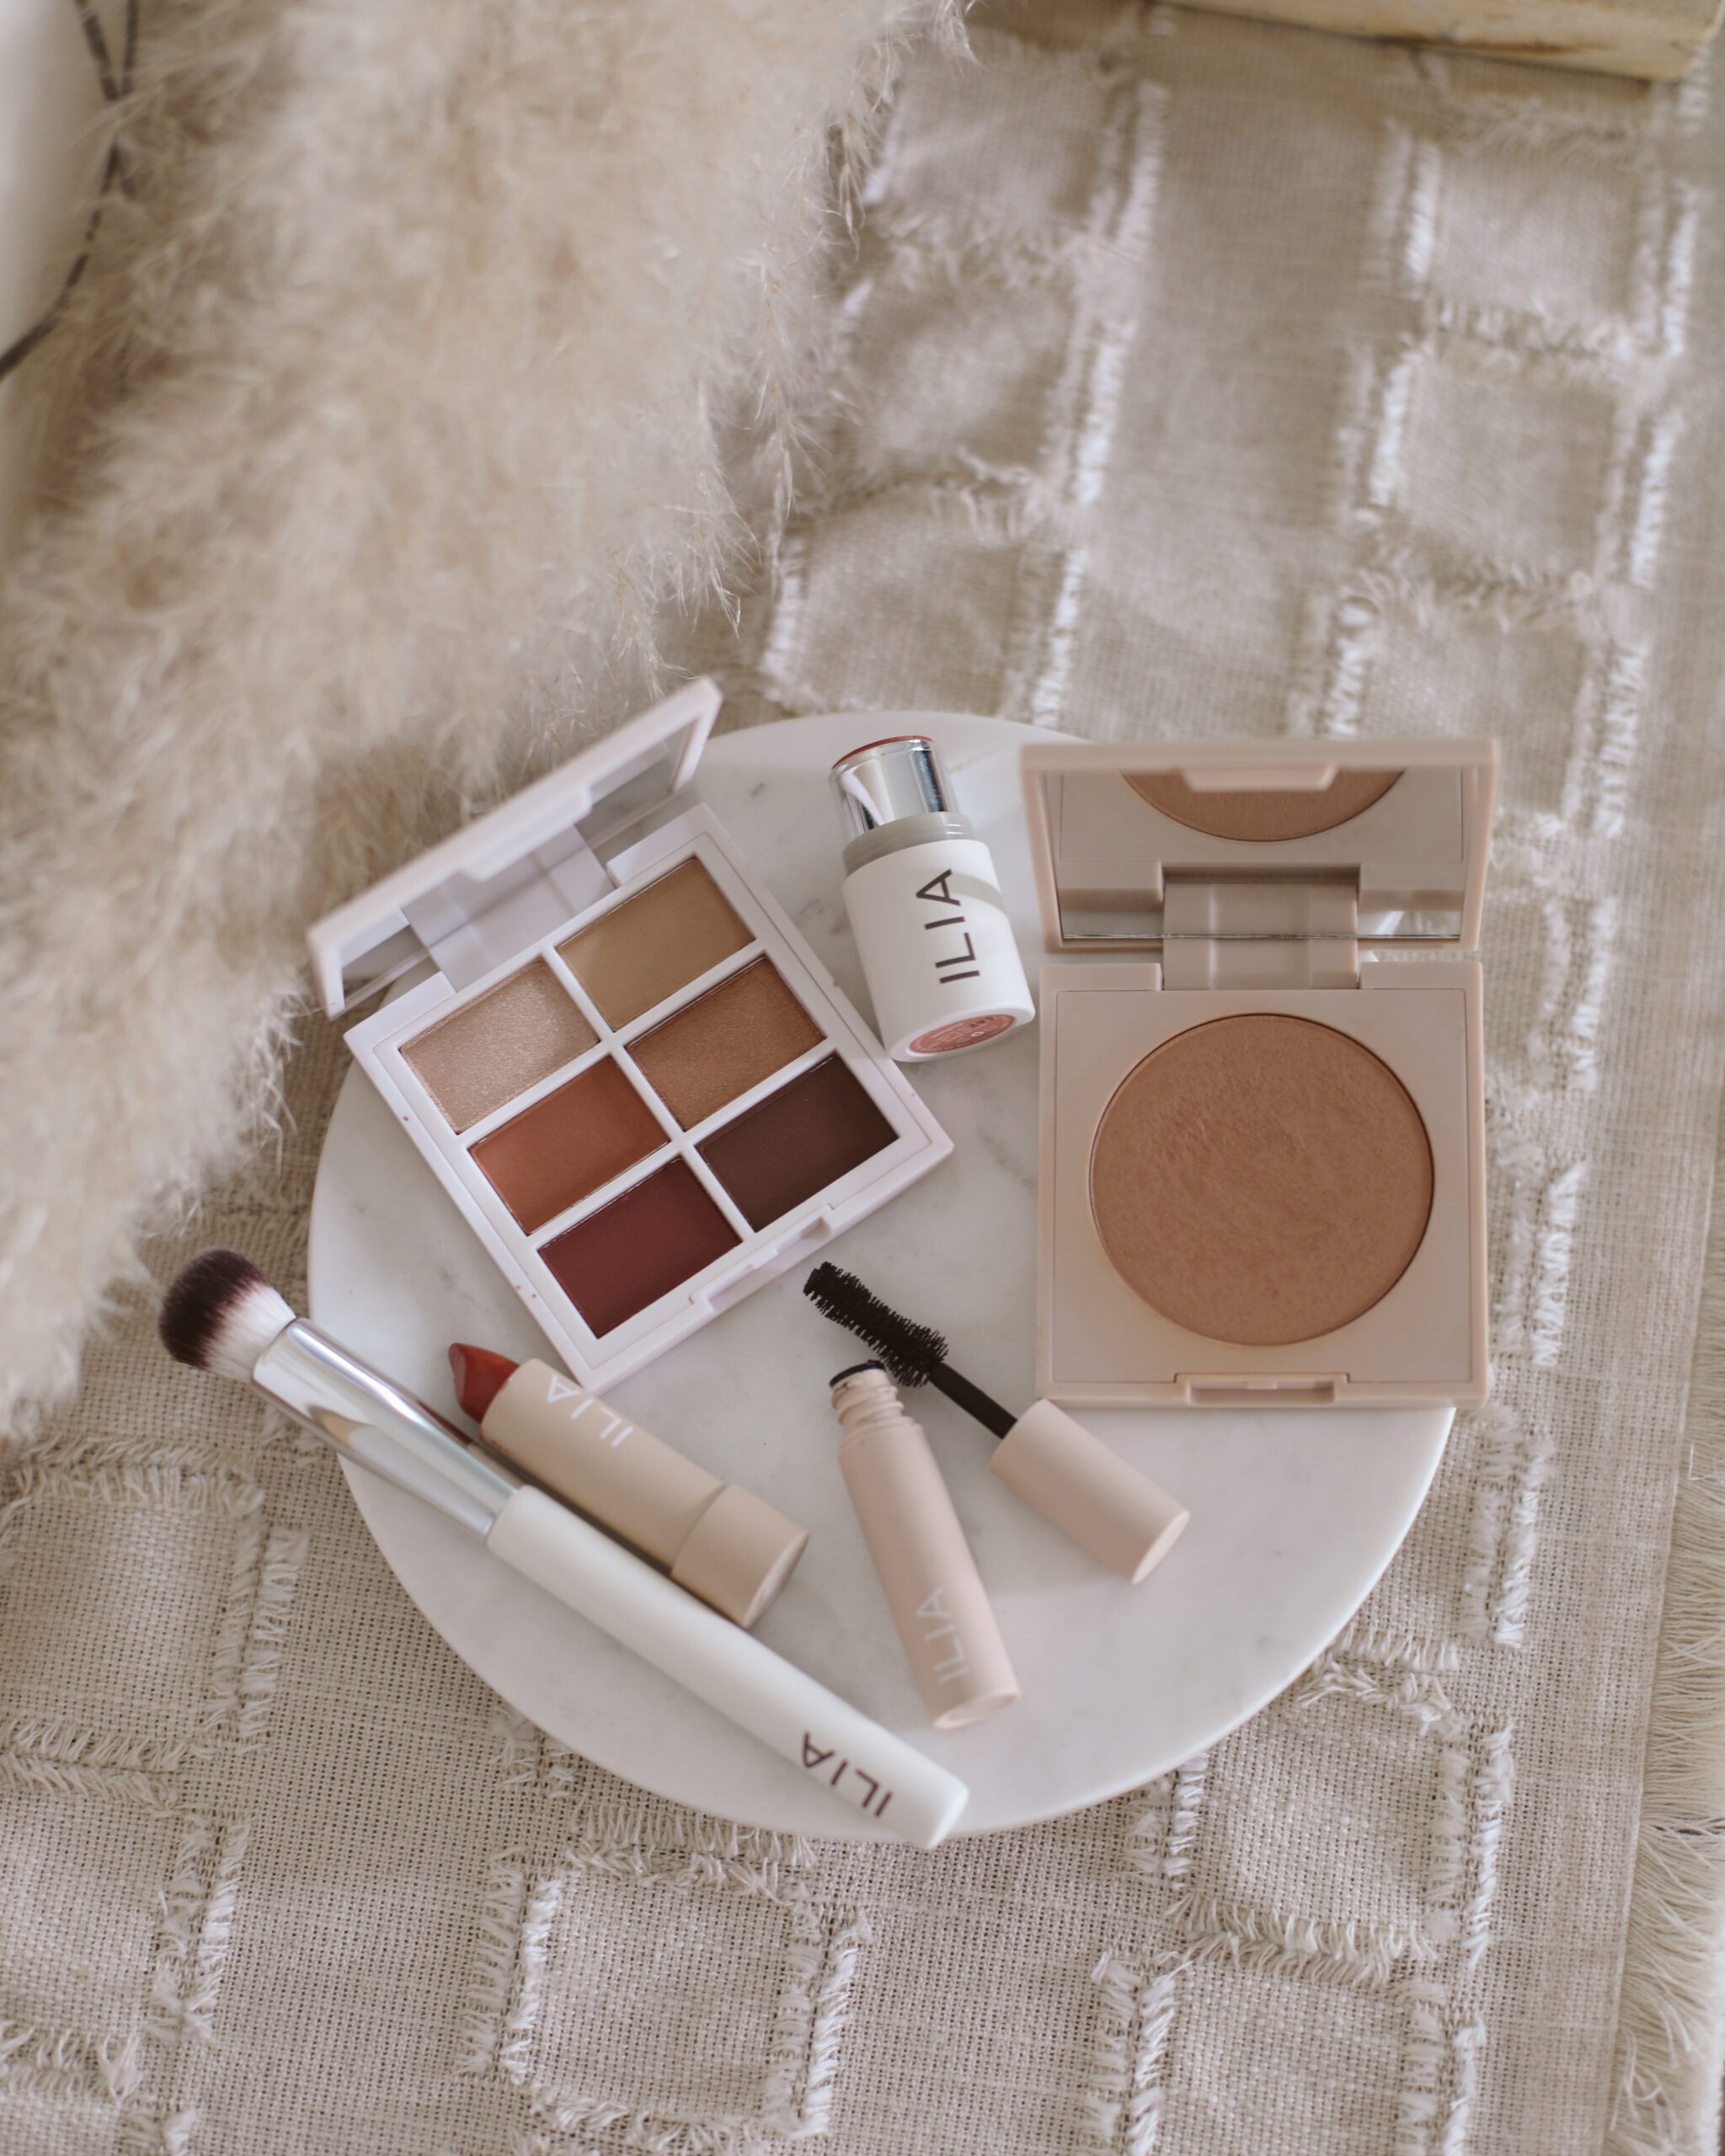 Ilia The Necessary Eyeshadow Palette Review 2022 - ILIA Beauty Reviews - Best Ilia Beauty Products 2022 - ILIA Beauty Clean Makeup Reviews - Affordable by Amanda Beauty Reviews